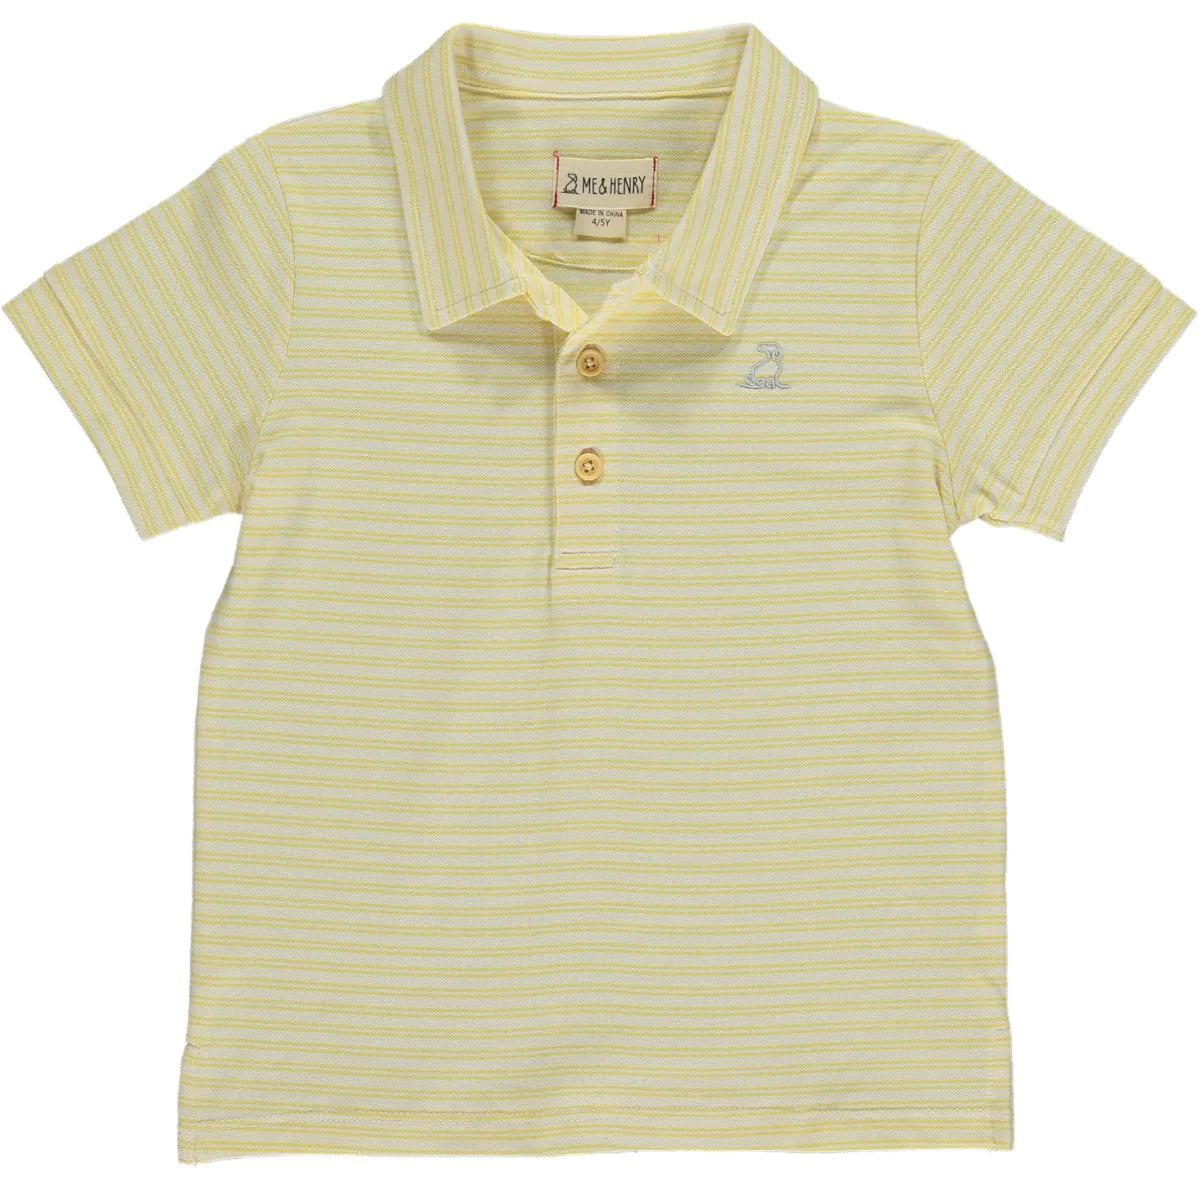 Starboard Striped Polo Shirt